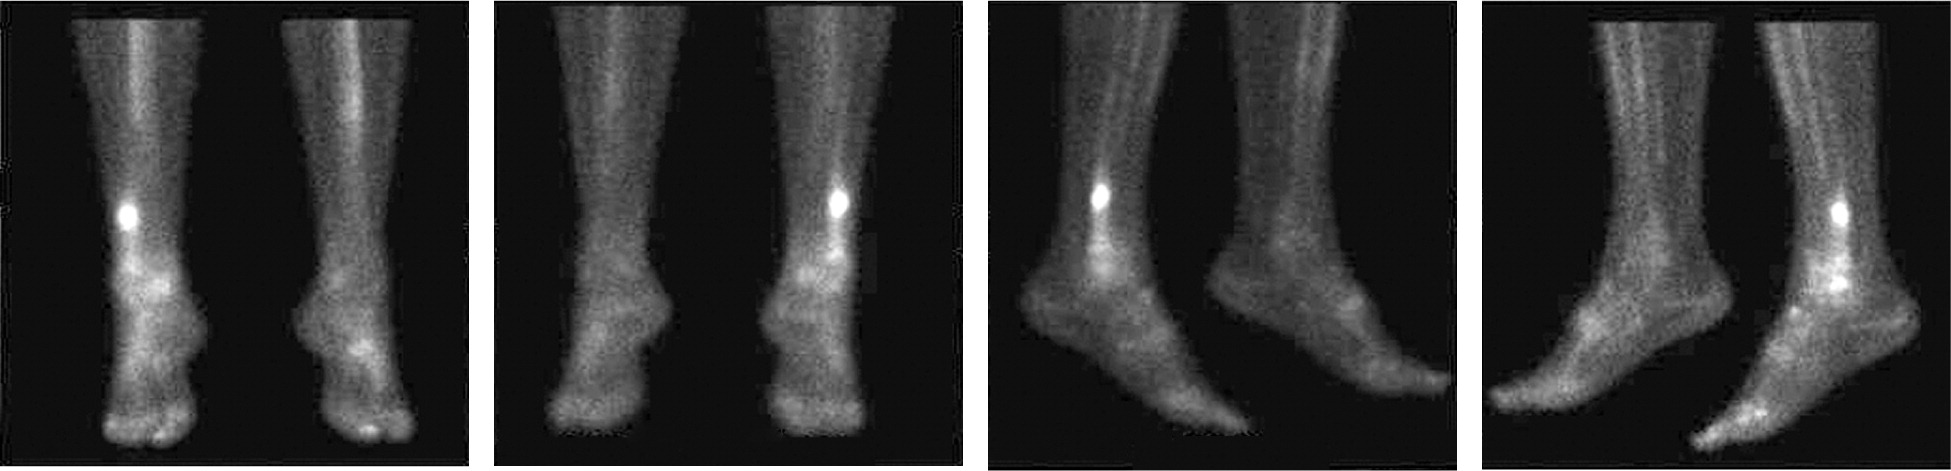 stress fracture shin from fall symptoms